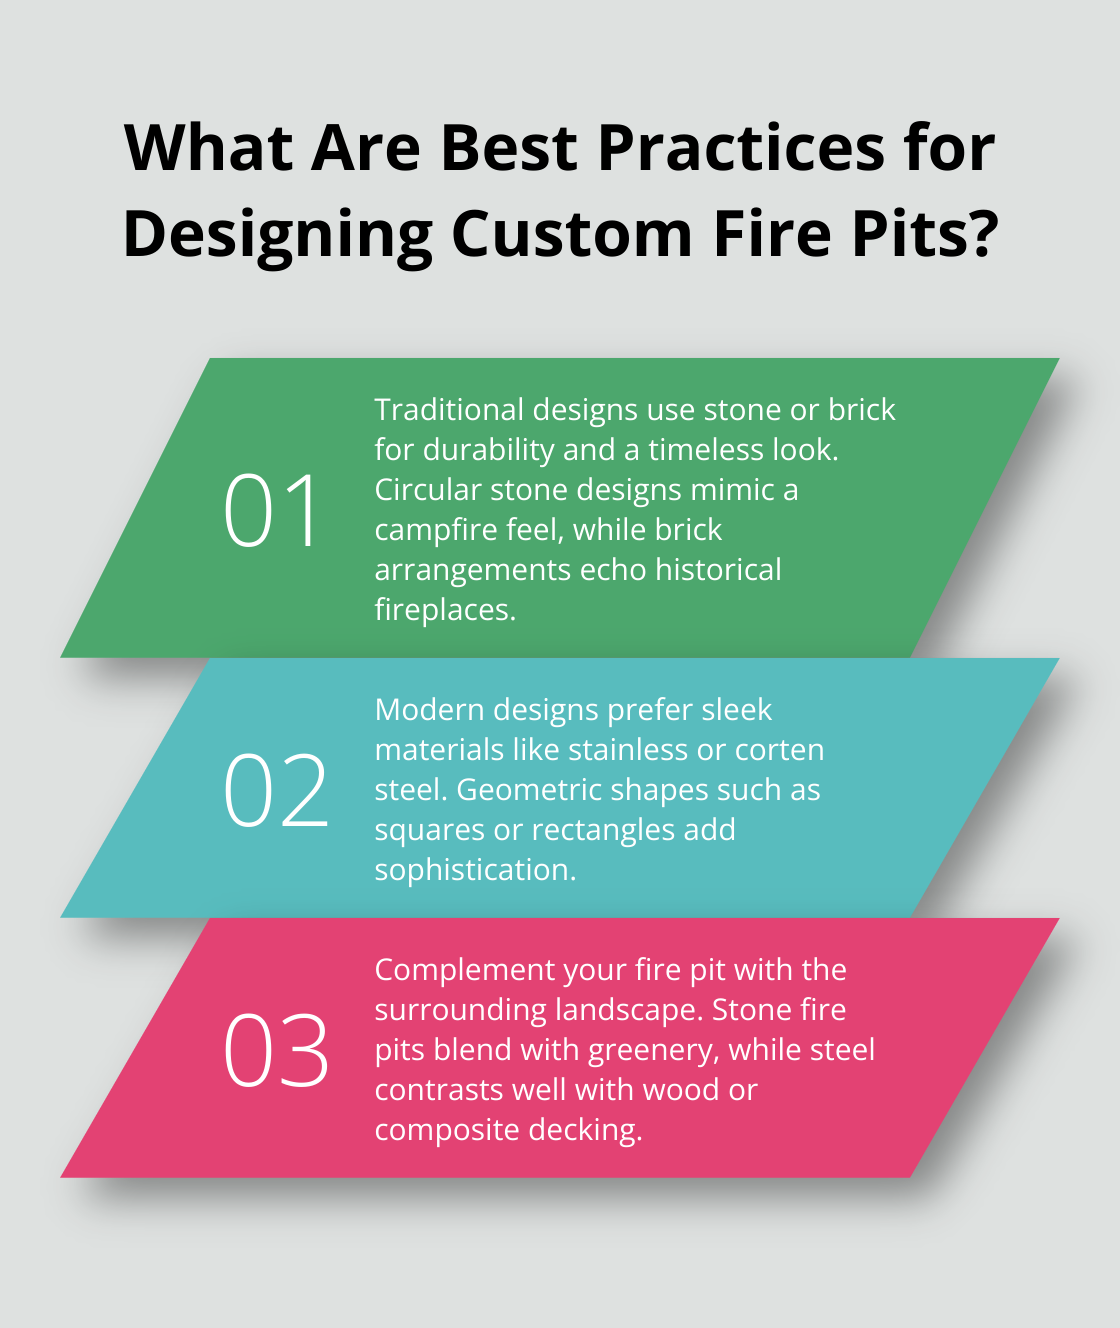 Fact - What Are Best Practices for Designing Custom Fire Pits?